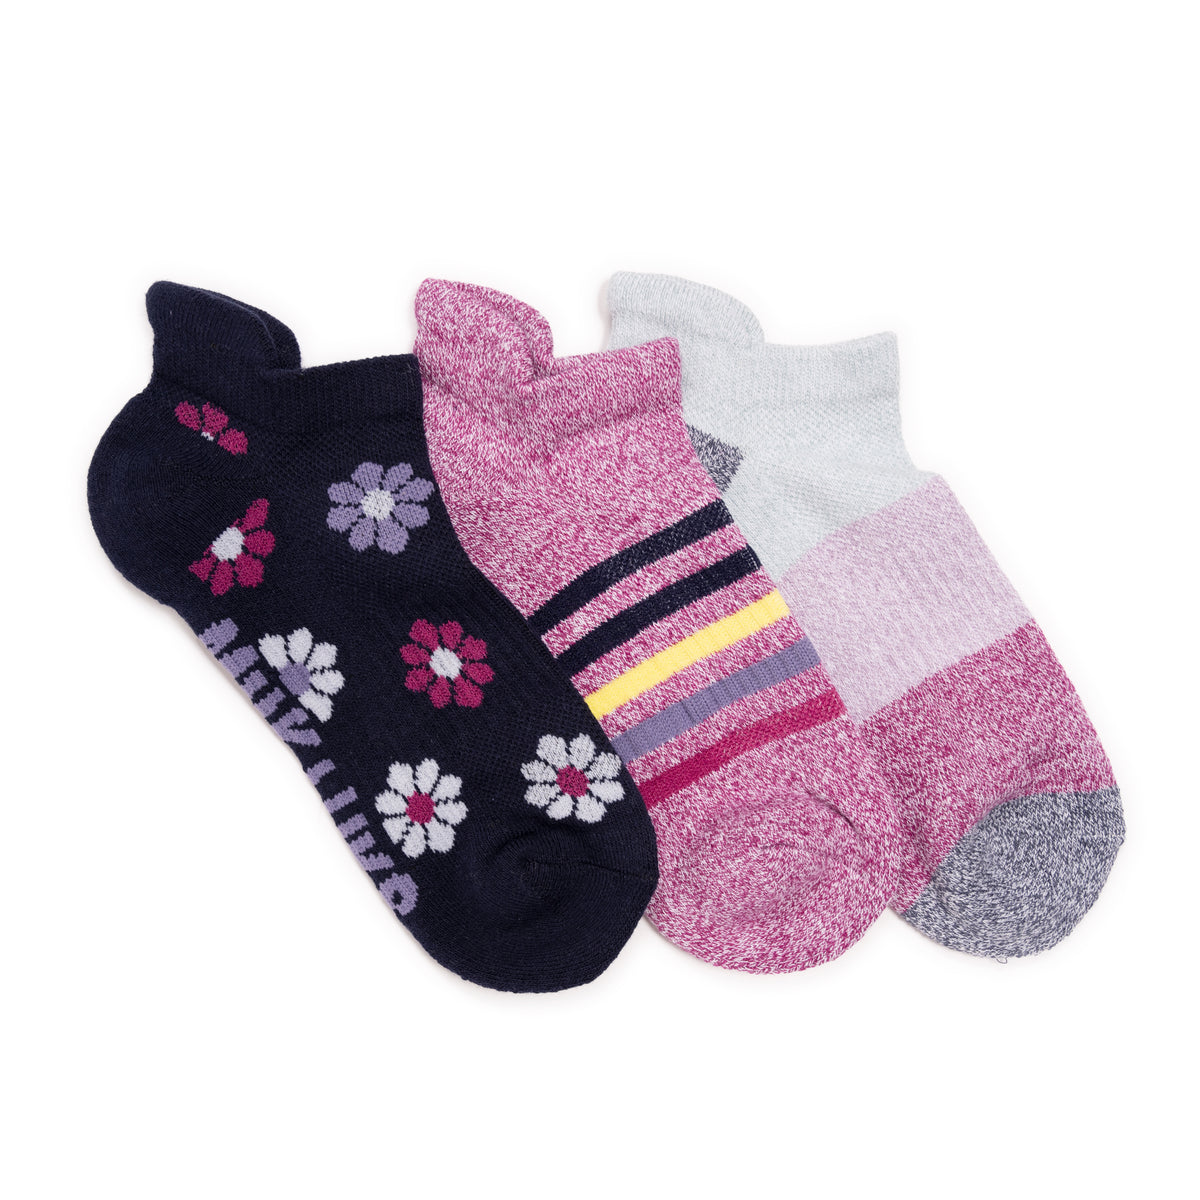 RUPA ROCK SPANDEX ANKLE SOCKS ASSORTED COLOUR PACK OF 3